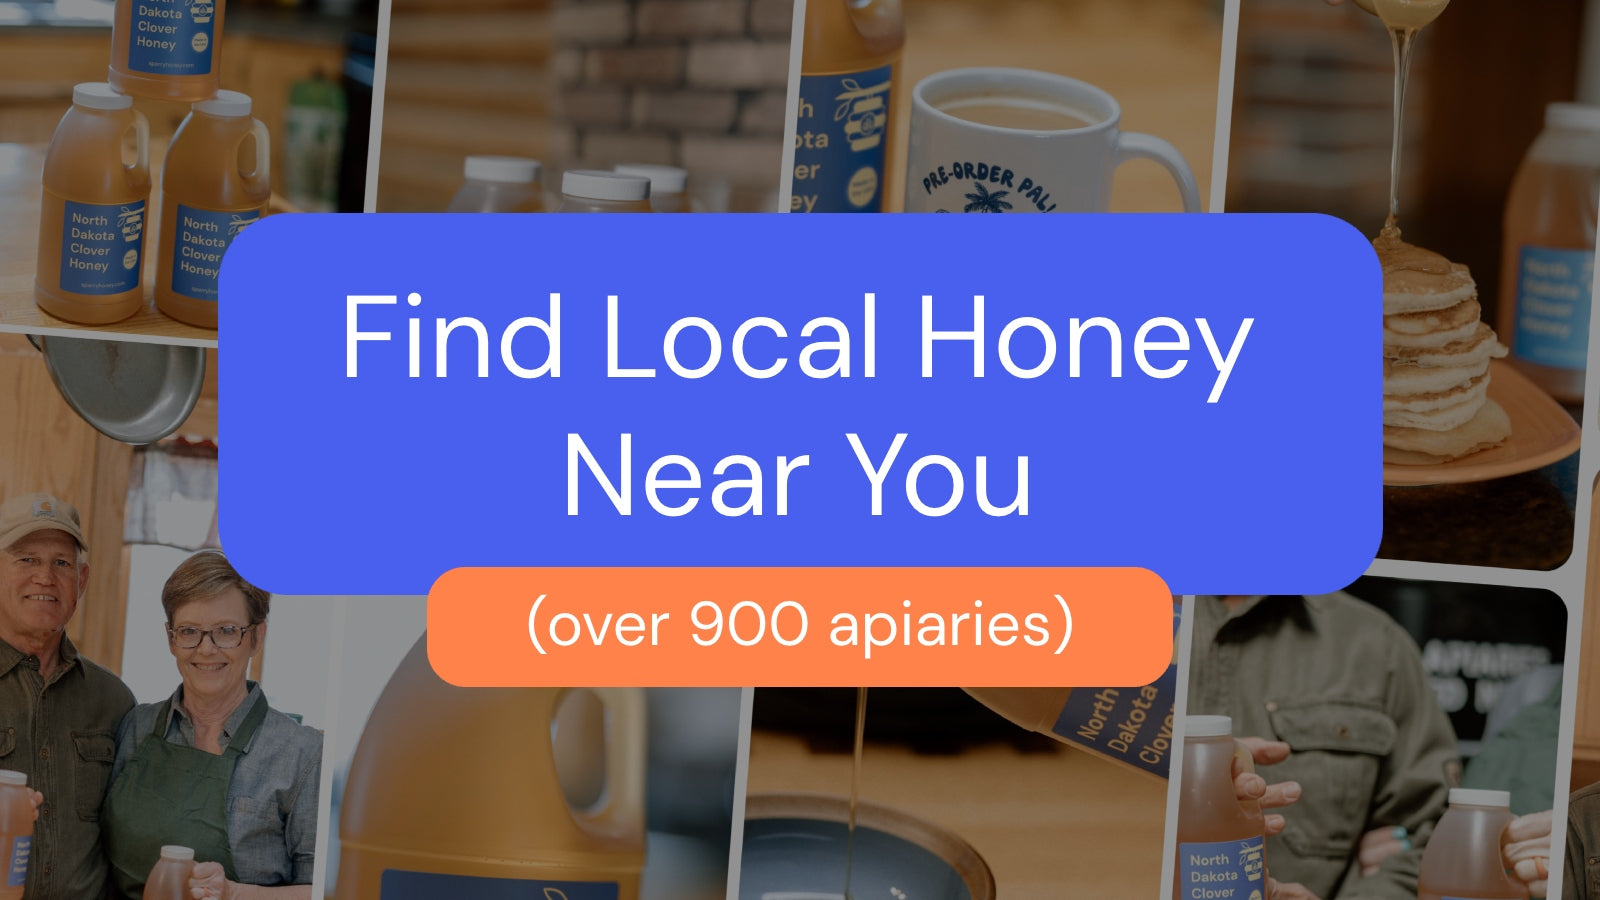 A banner that says "Find Local Honey Near You (over 900 apiaries)"